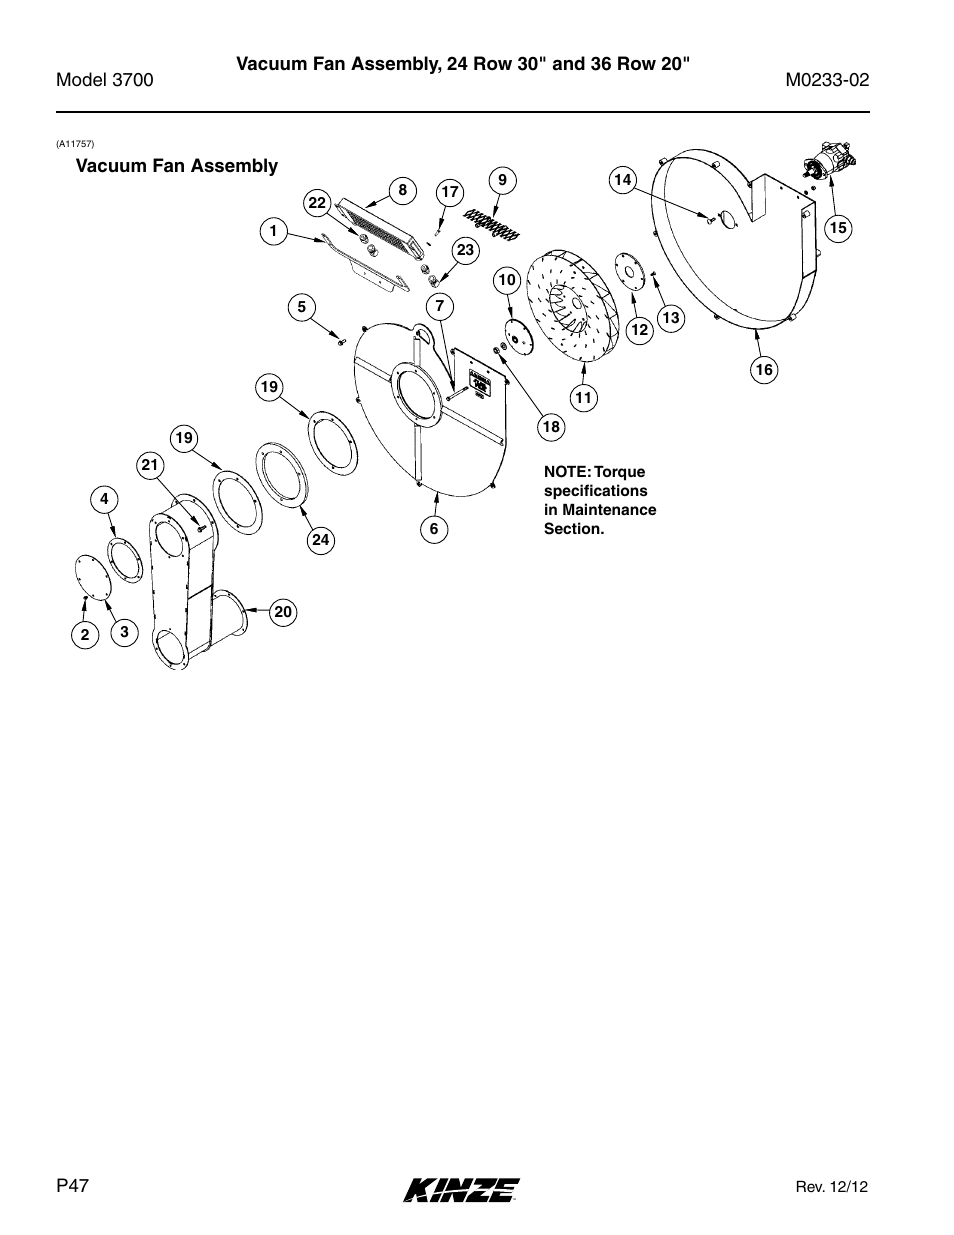 Vacuum fan assembly, 24 row 30" and 36 row 20 | Kinze 3700 Front Folding Planter Rev. 6/14 User Manual | Page 50 / 284